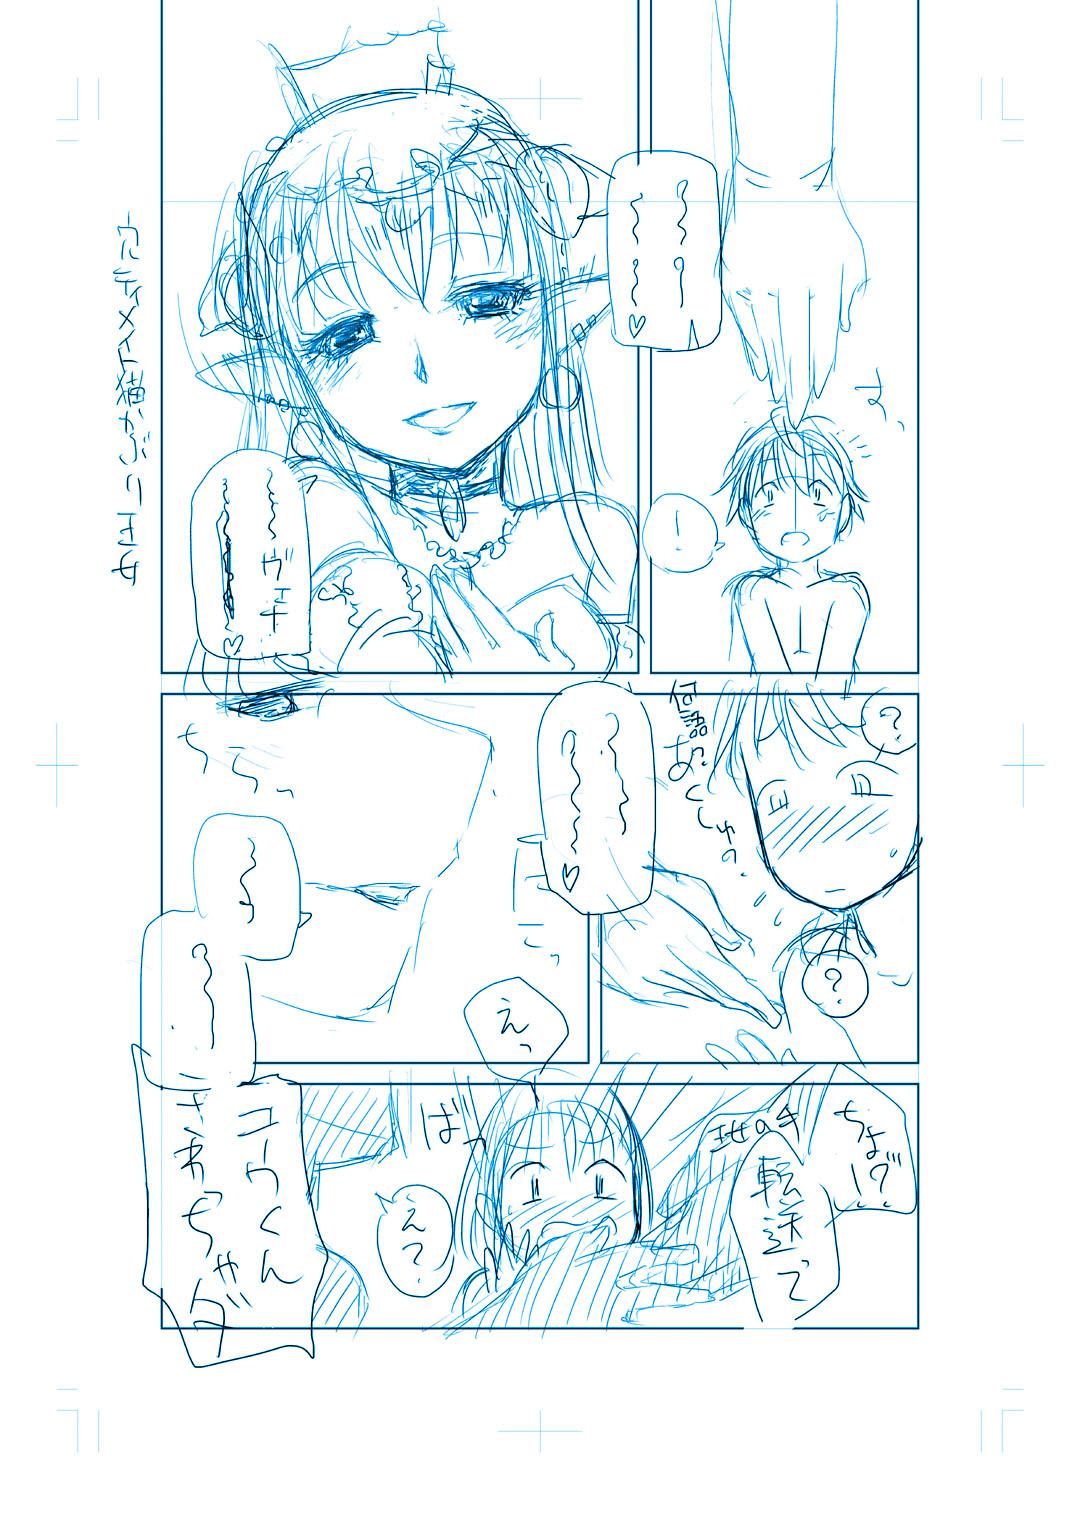 Brother Sister [Iwaman] 商業連載用ネーム「王女と彼女の十月十日」供養(ヽ´ω`)人 - Original Tease - Page 11